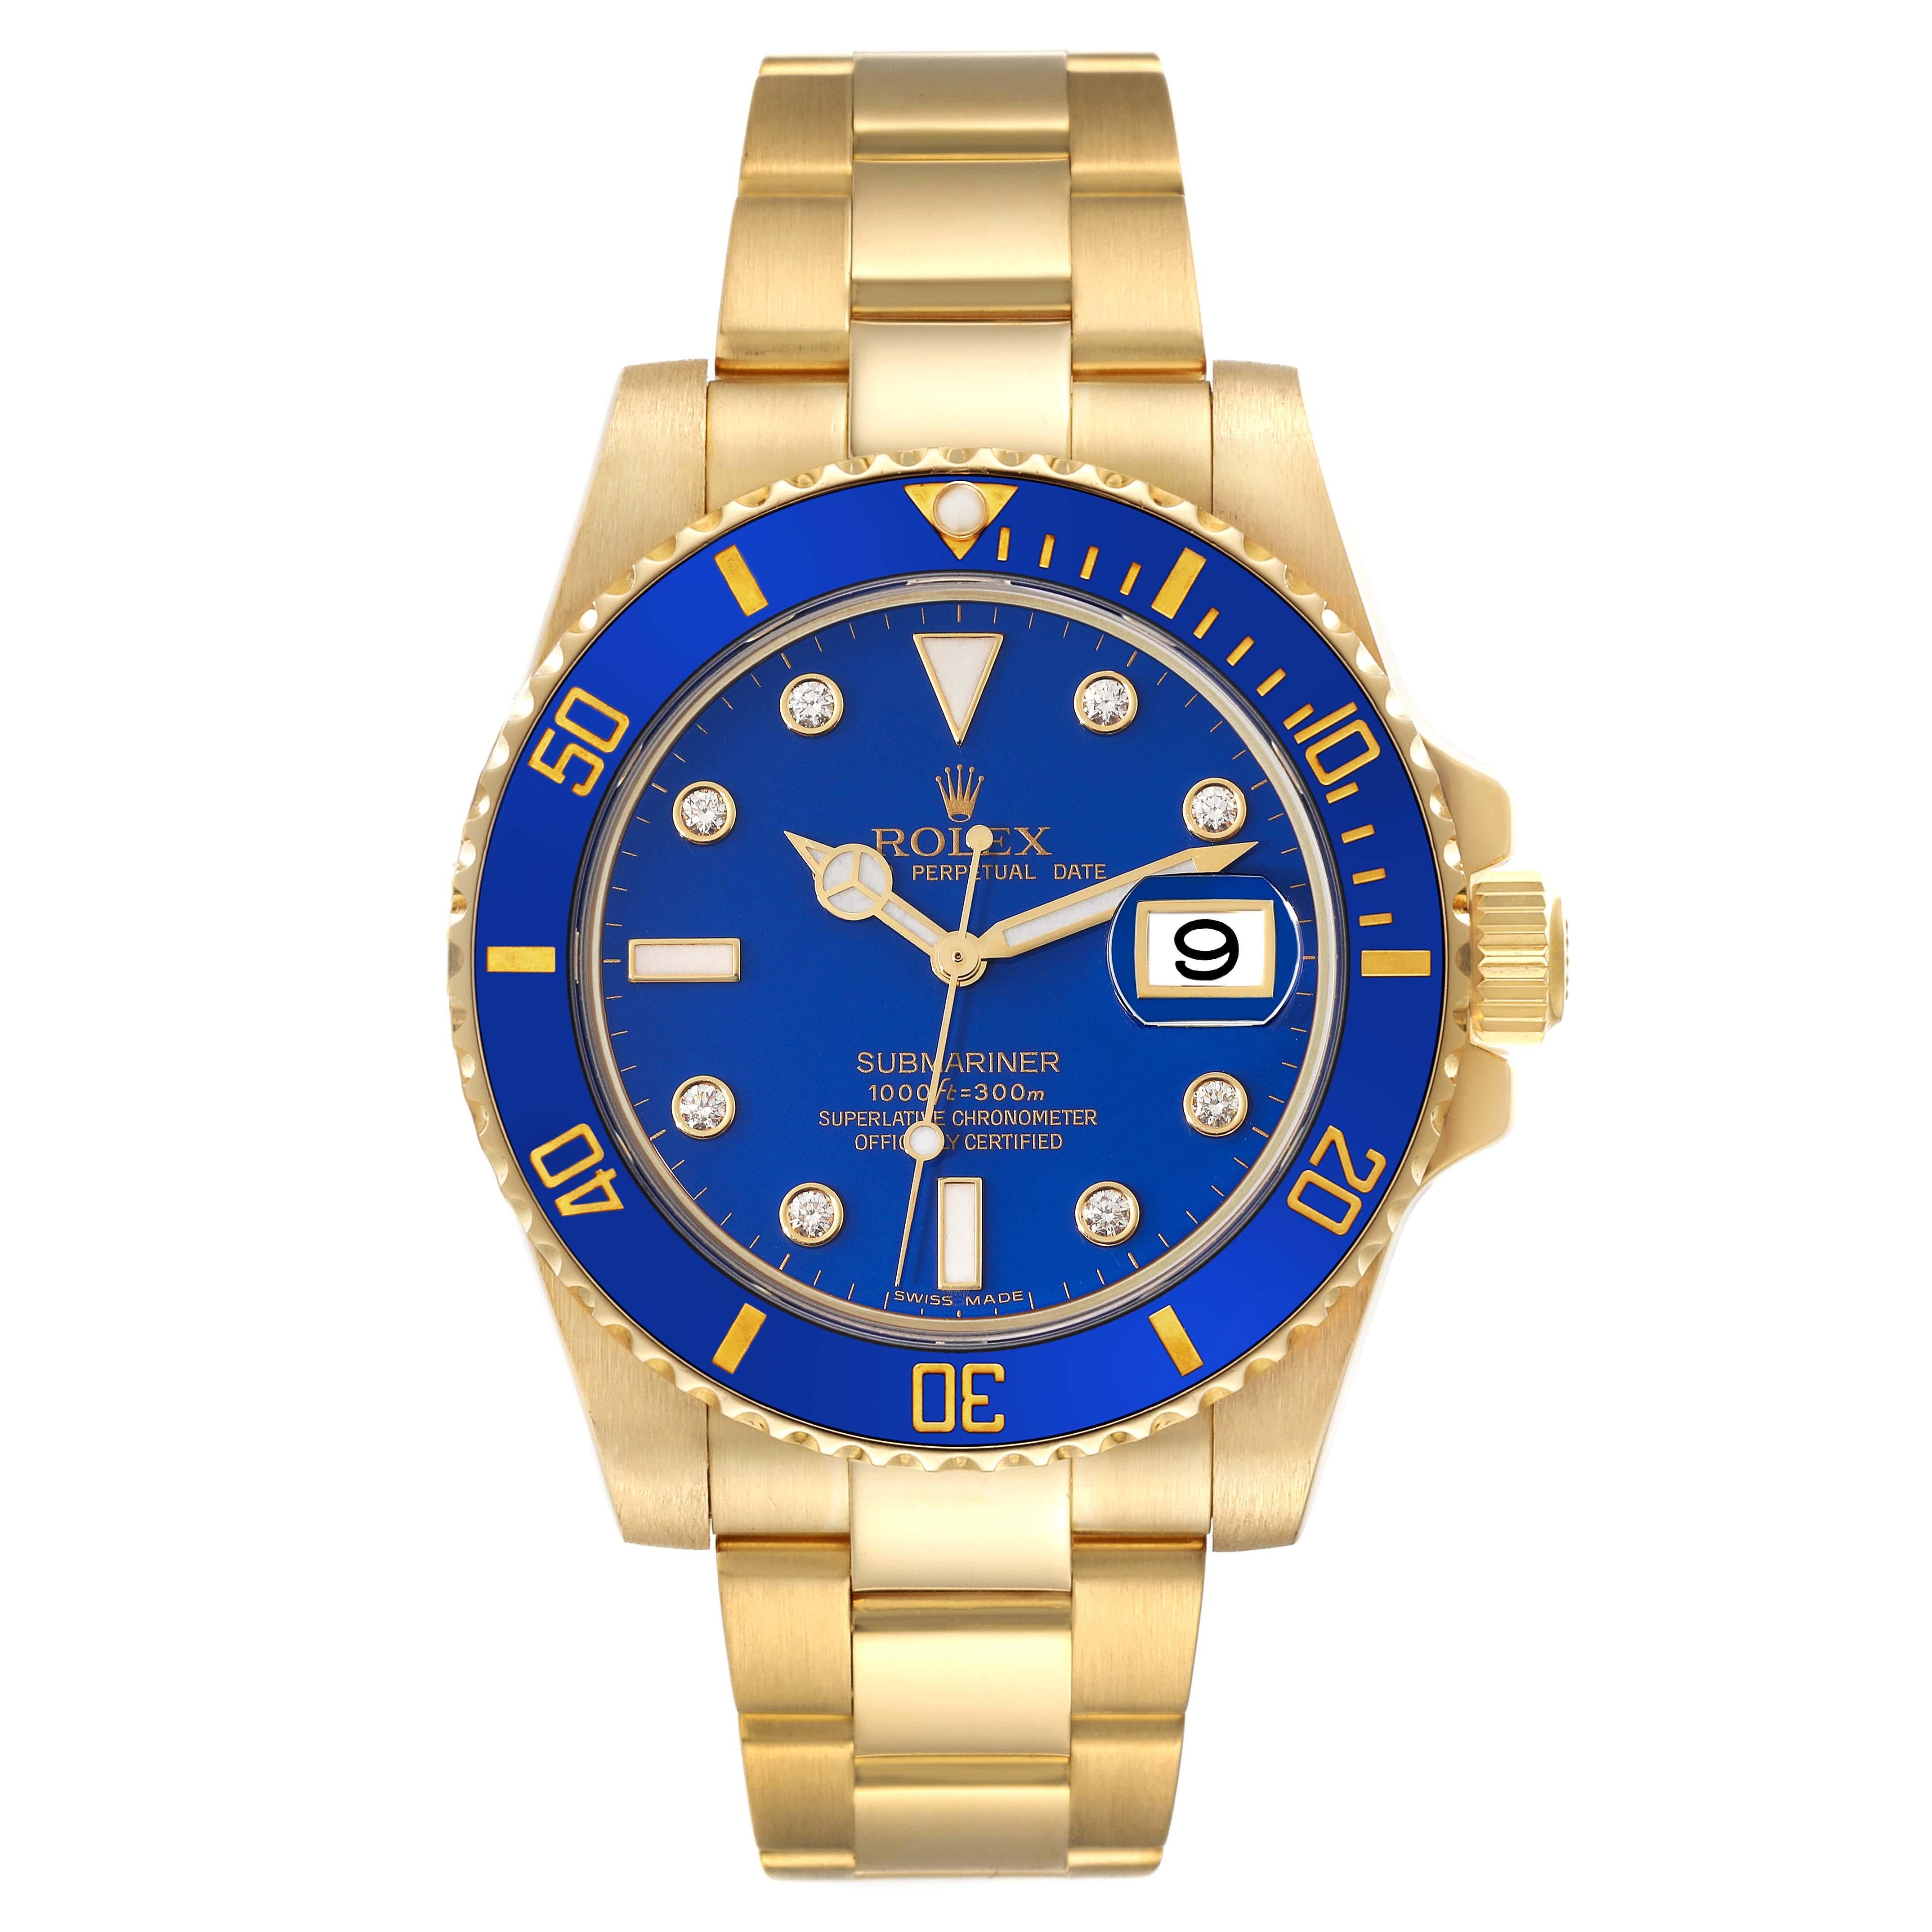 Rolex Submariner Yellow Gold Blue Diamond Dial Mens Watch 116618 Box Card. Officially certified chronometer self-winding movement. 18k yellow gold case 40.0 mm in diameter. Rolex logo on a crown. Ceramic blue Ion-plated special time-lapse